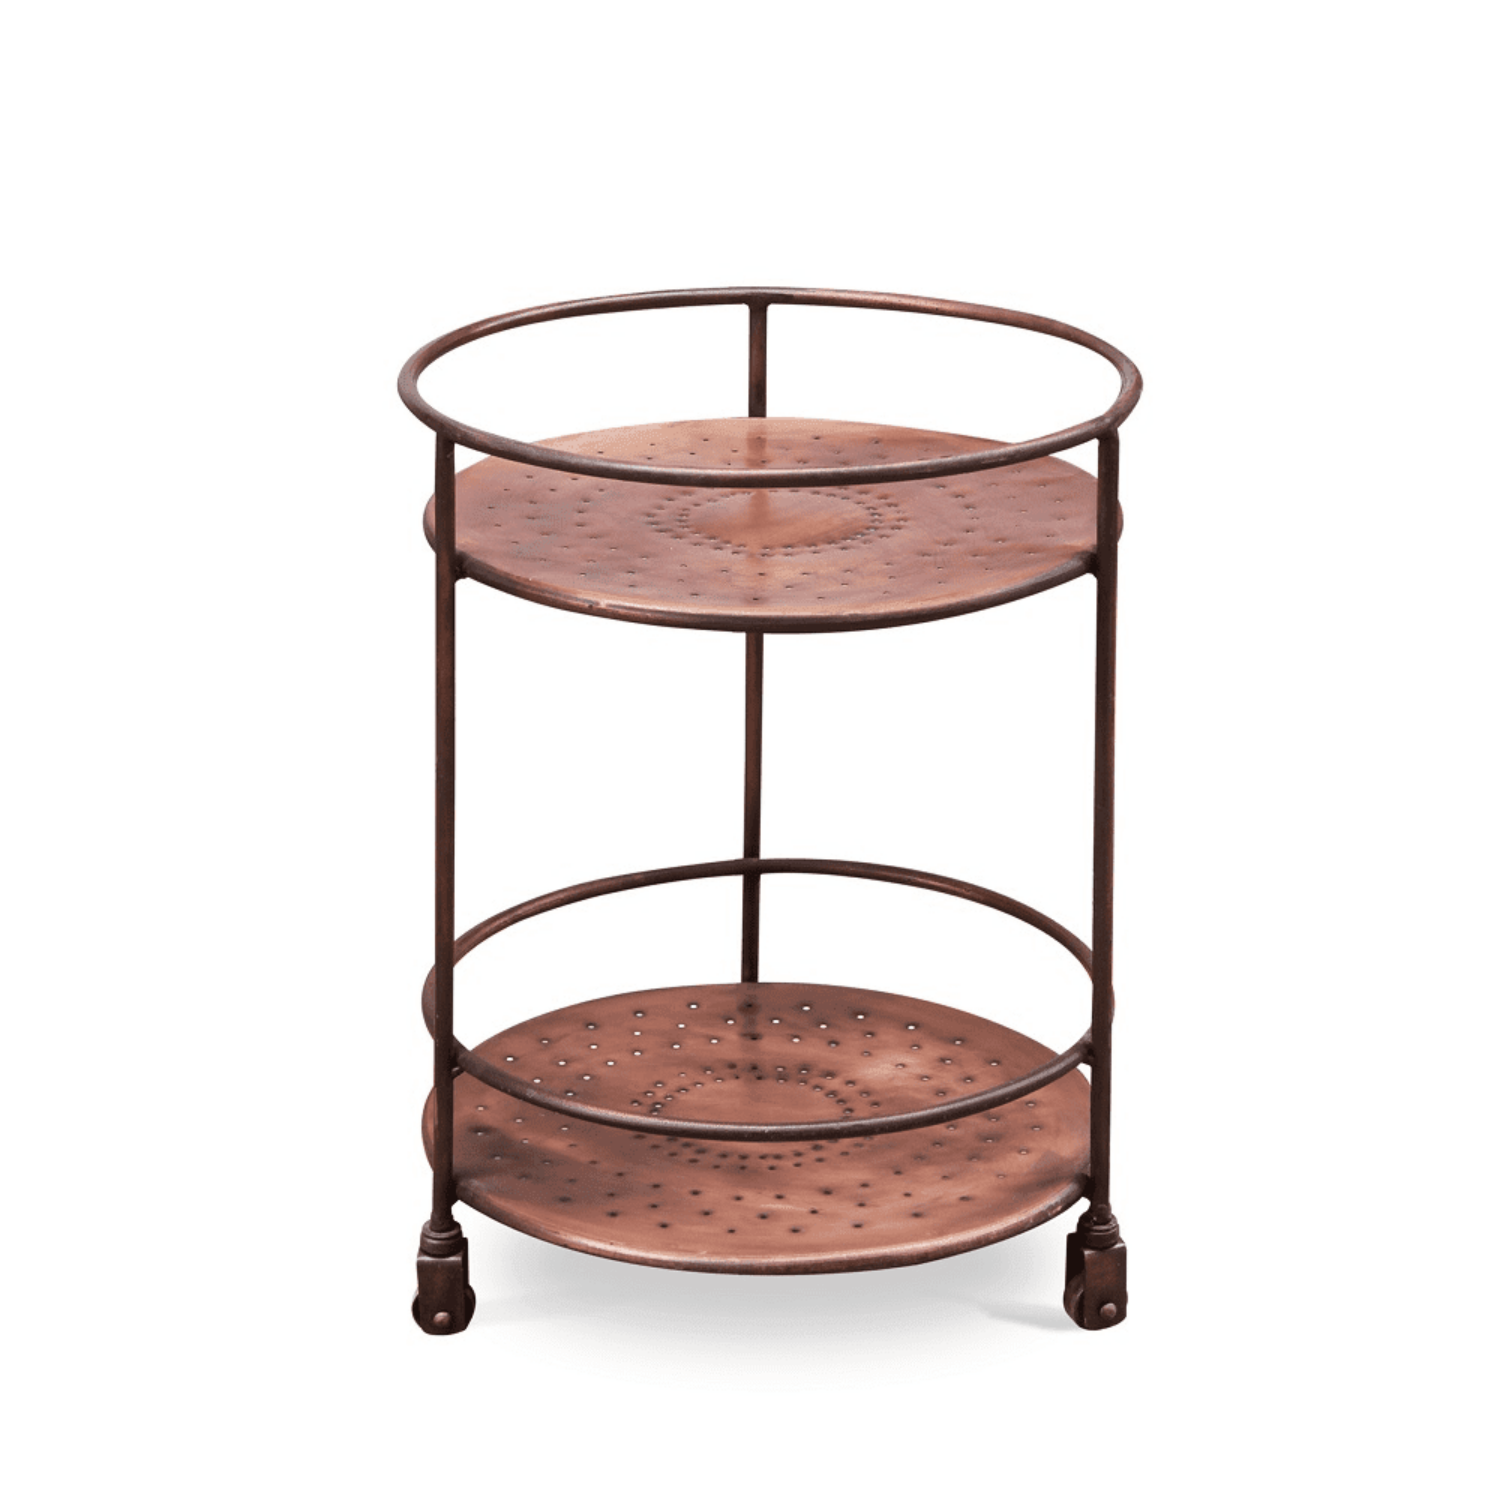 INDUSRIAL KITCHEN TROLLEY